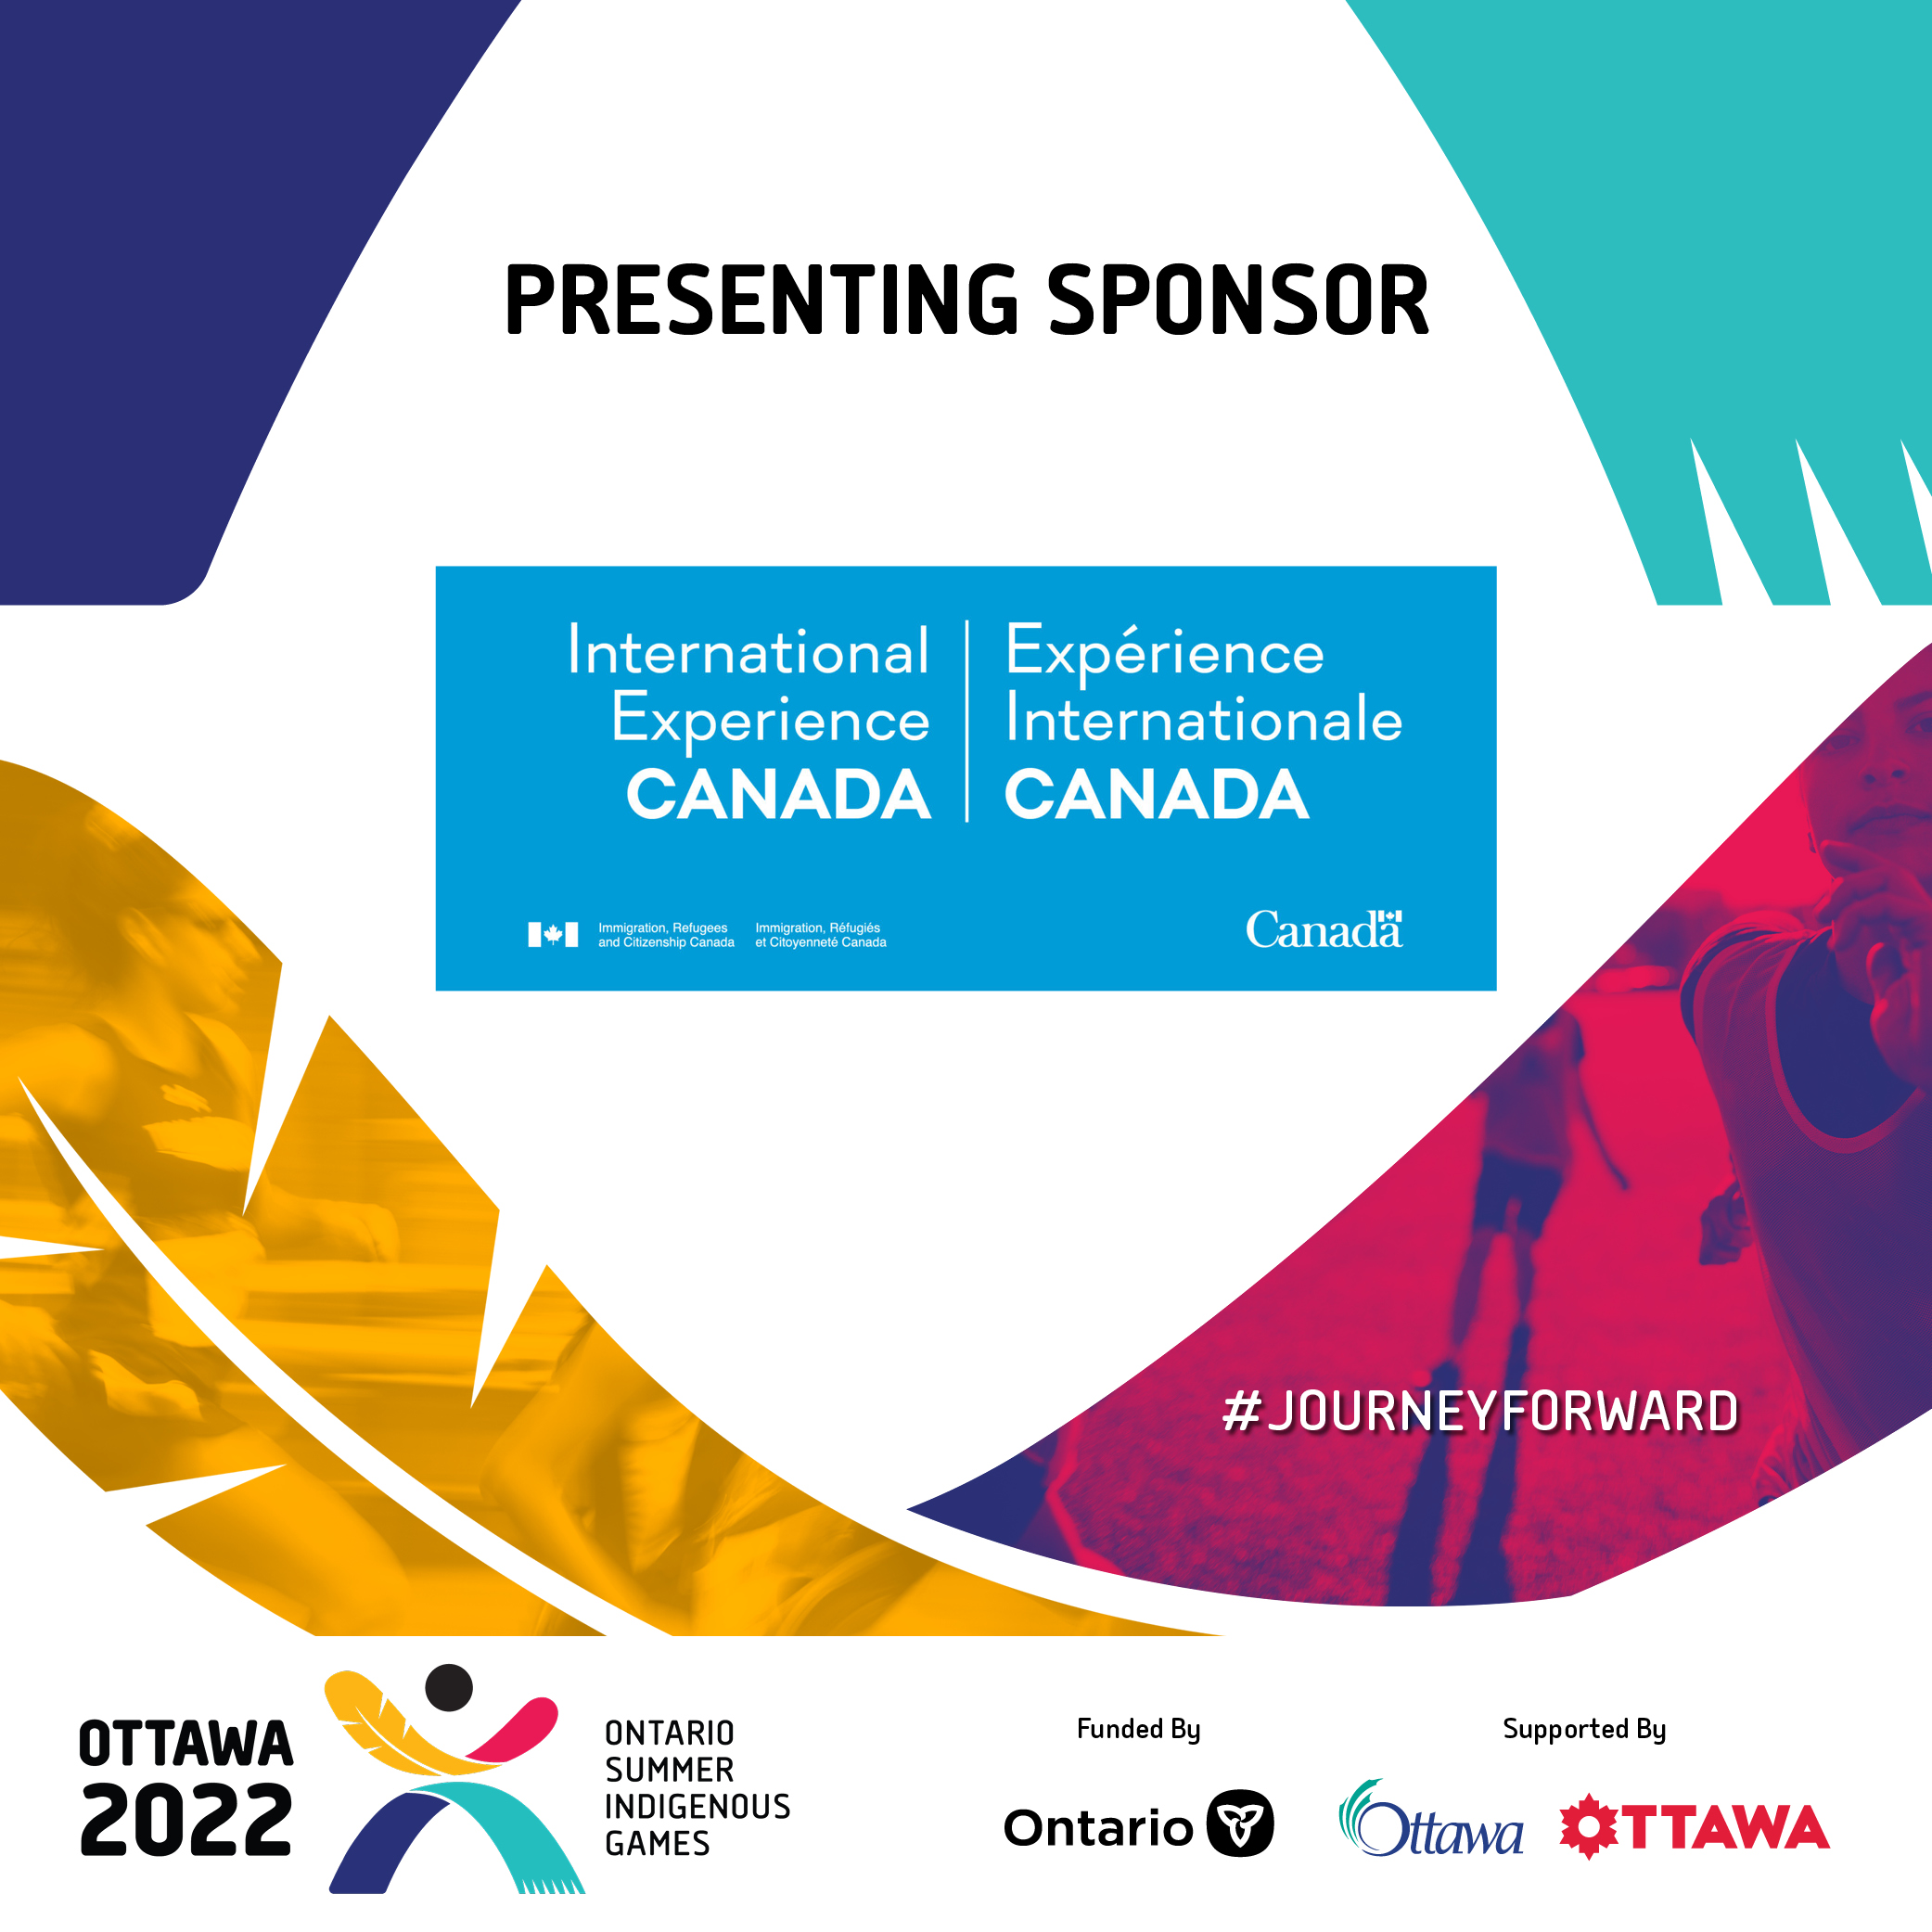 INTERNATIONAL EXPERIENCE CANADA GEARS UP AS A PRESENTING SPONSOR FOR THE  2022 ONTARIO SUMMER INDIGENOUS GAMES